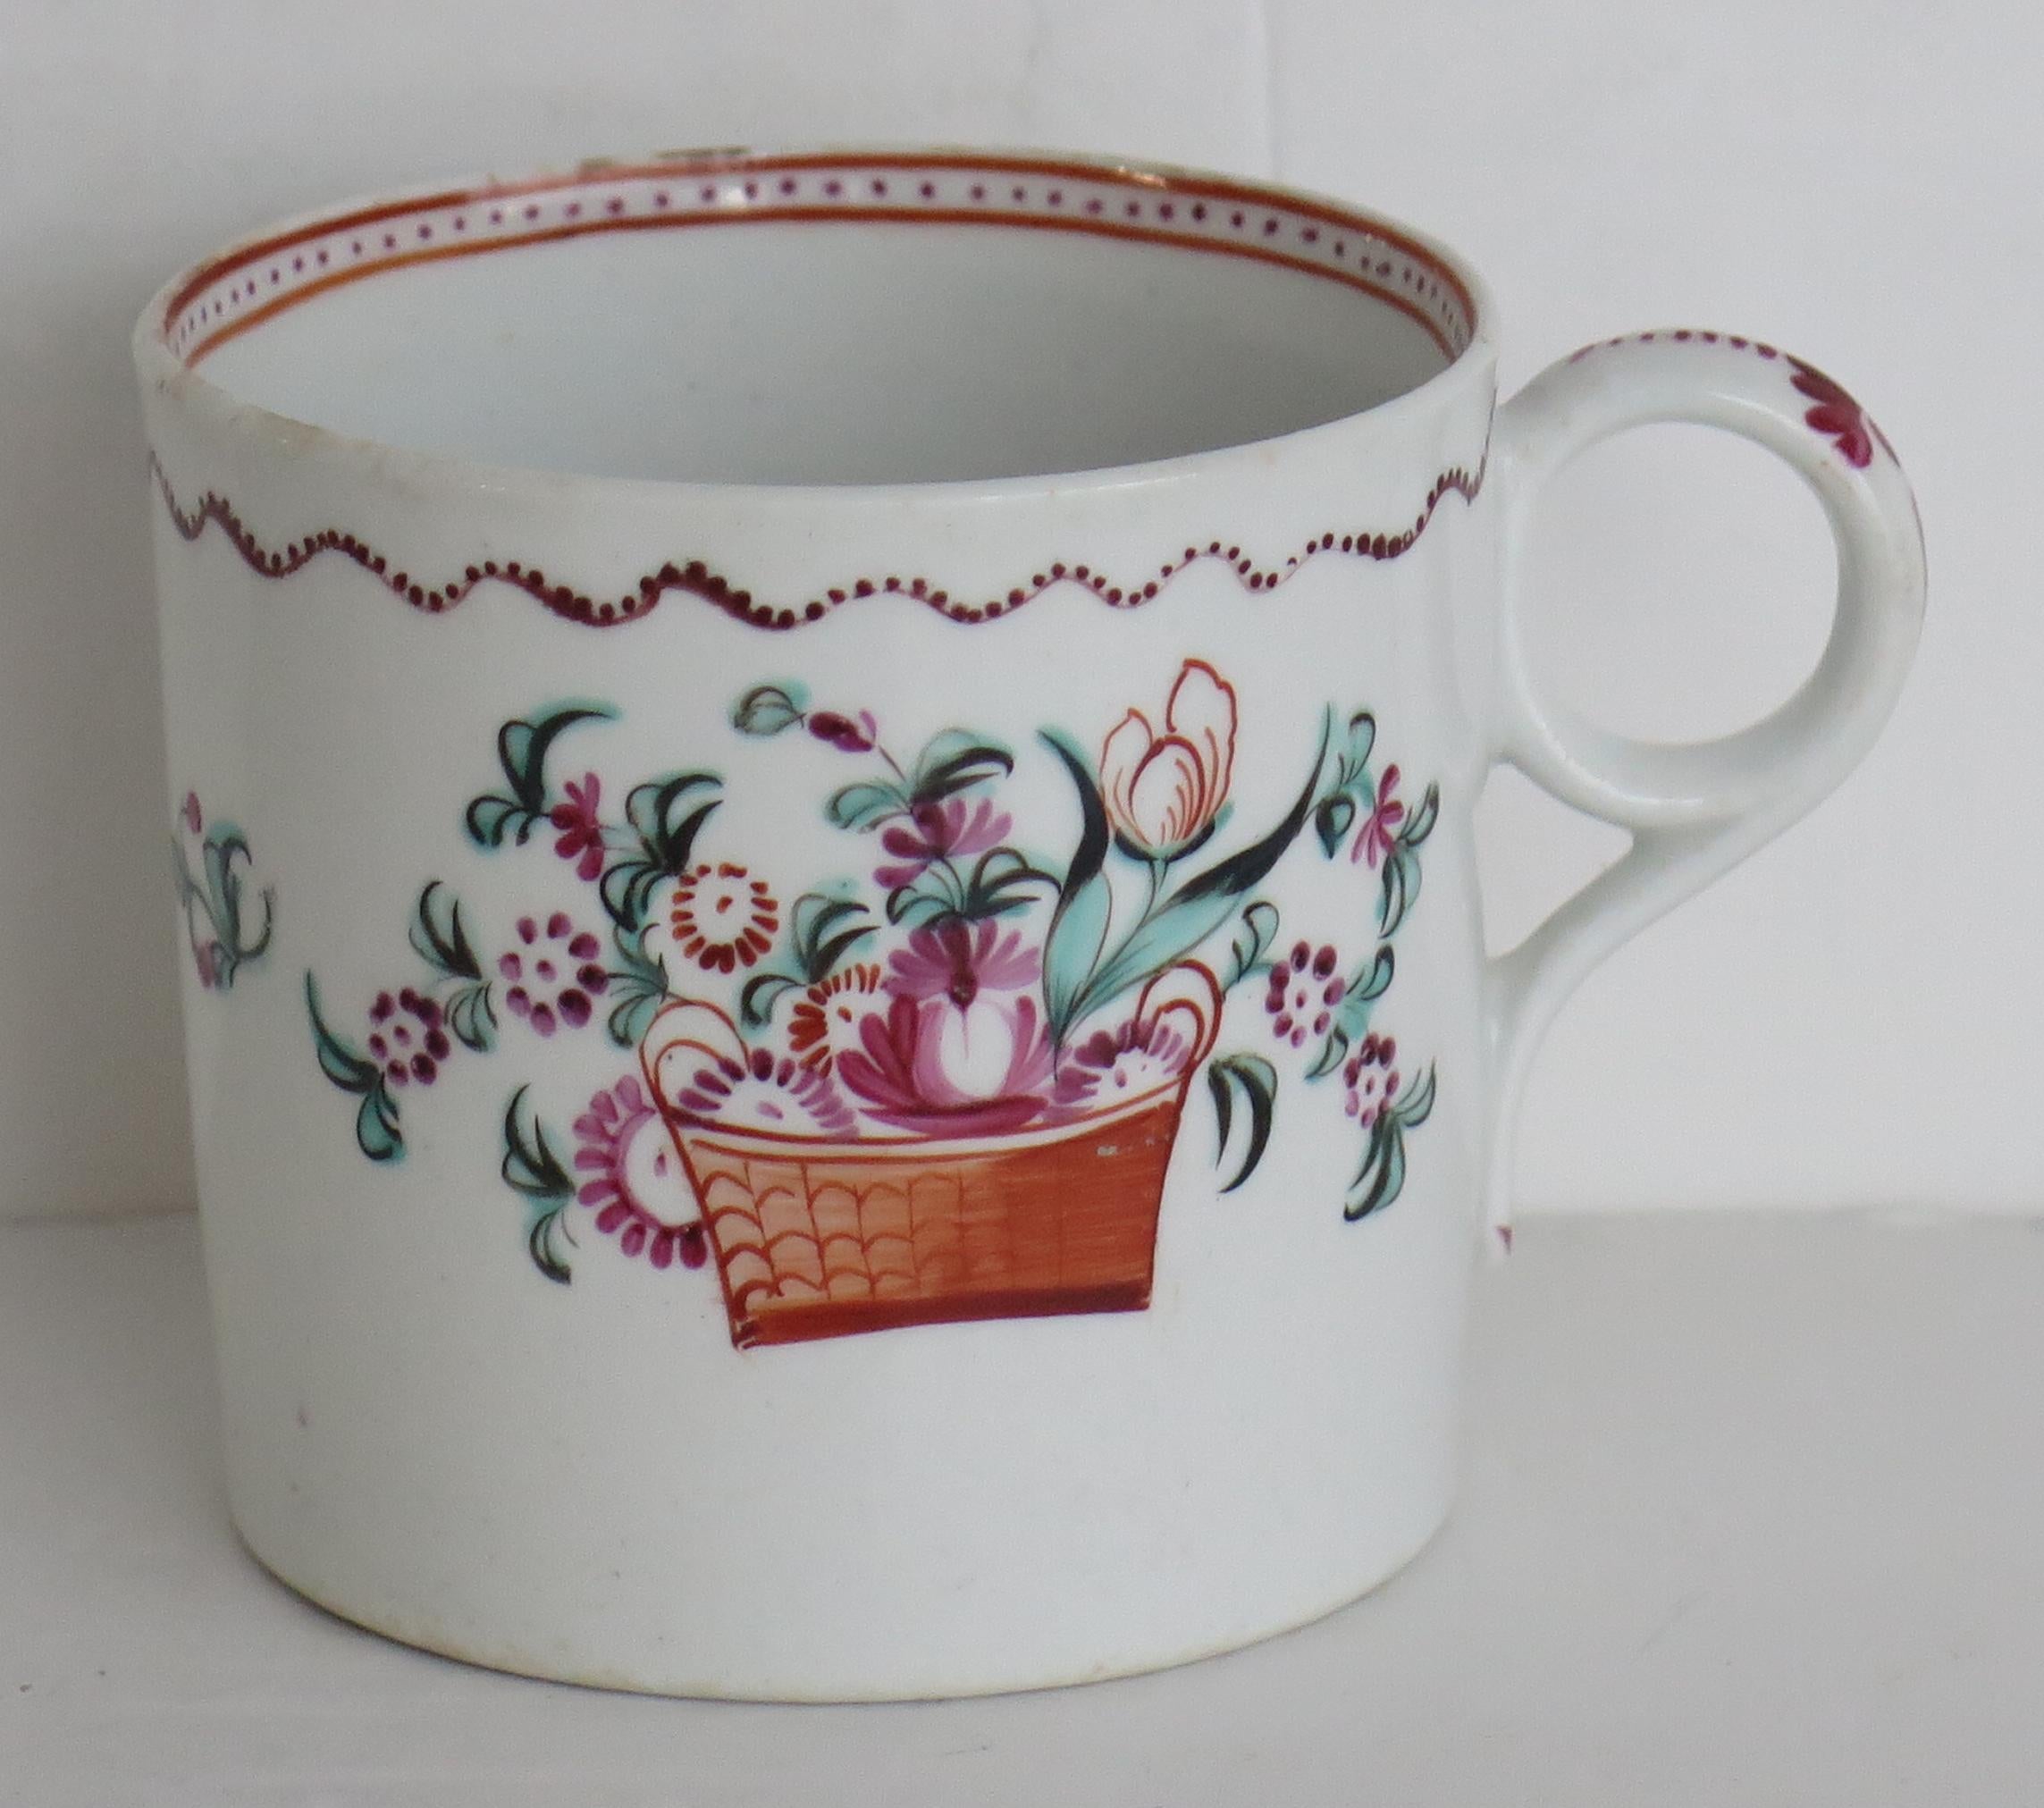 This is a hard paste porcelain coffee Can by New Hall, dating to the late 18th century, George 111rd period, circa 1790 t0 1795.

The piece is well potted on a low foot with a ring handle.

The cup is decorated over-glaze with hand painted